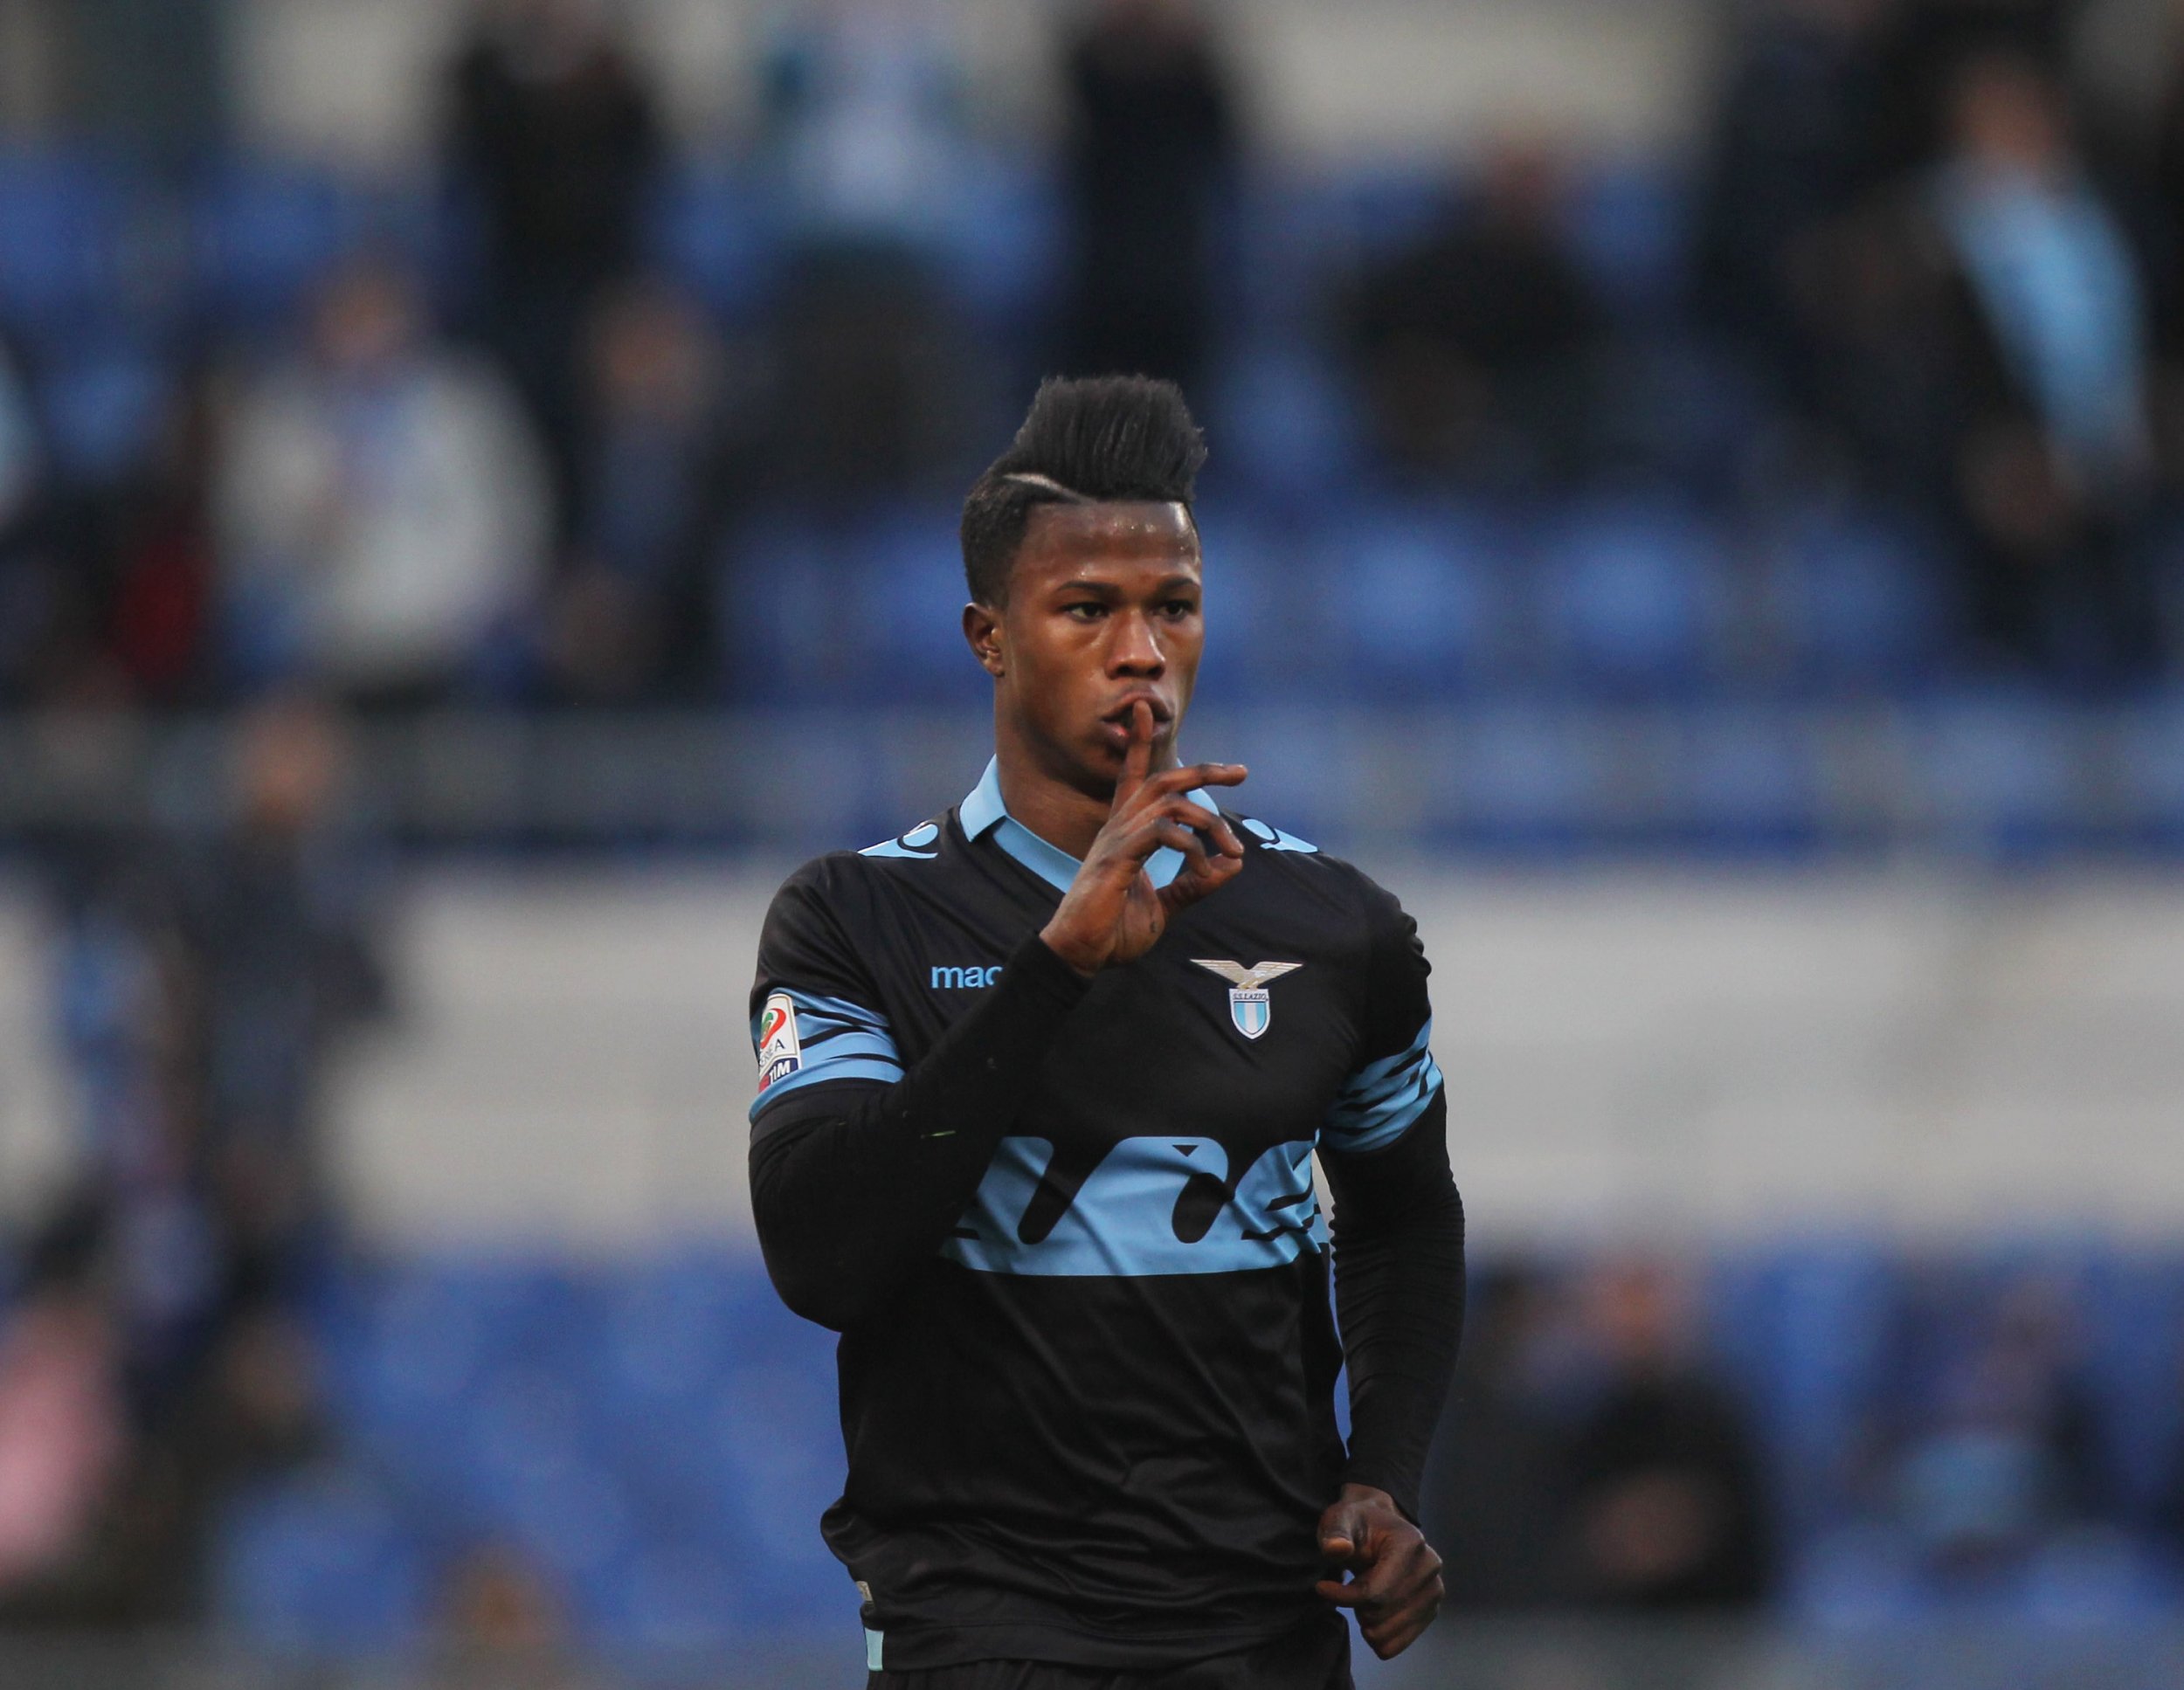 Keita Balde Diao says it is his 'dream' to play for Manchester United.